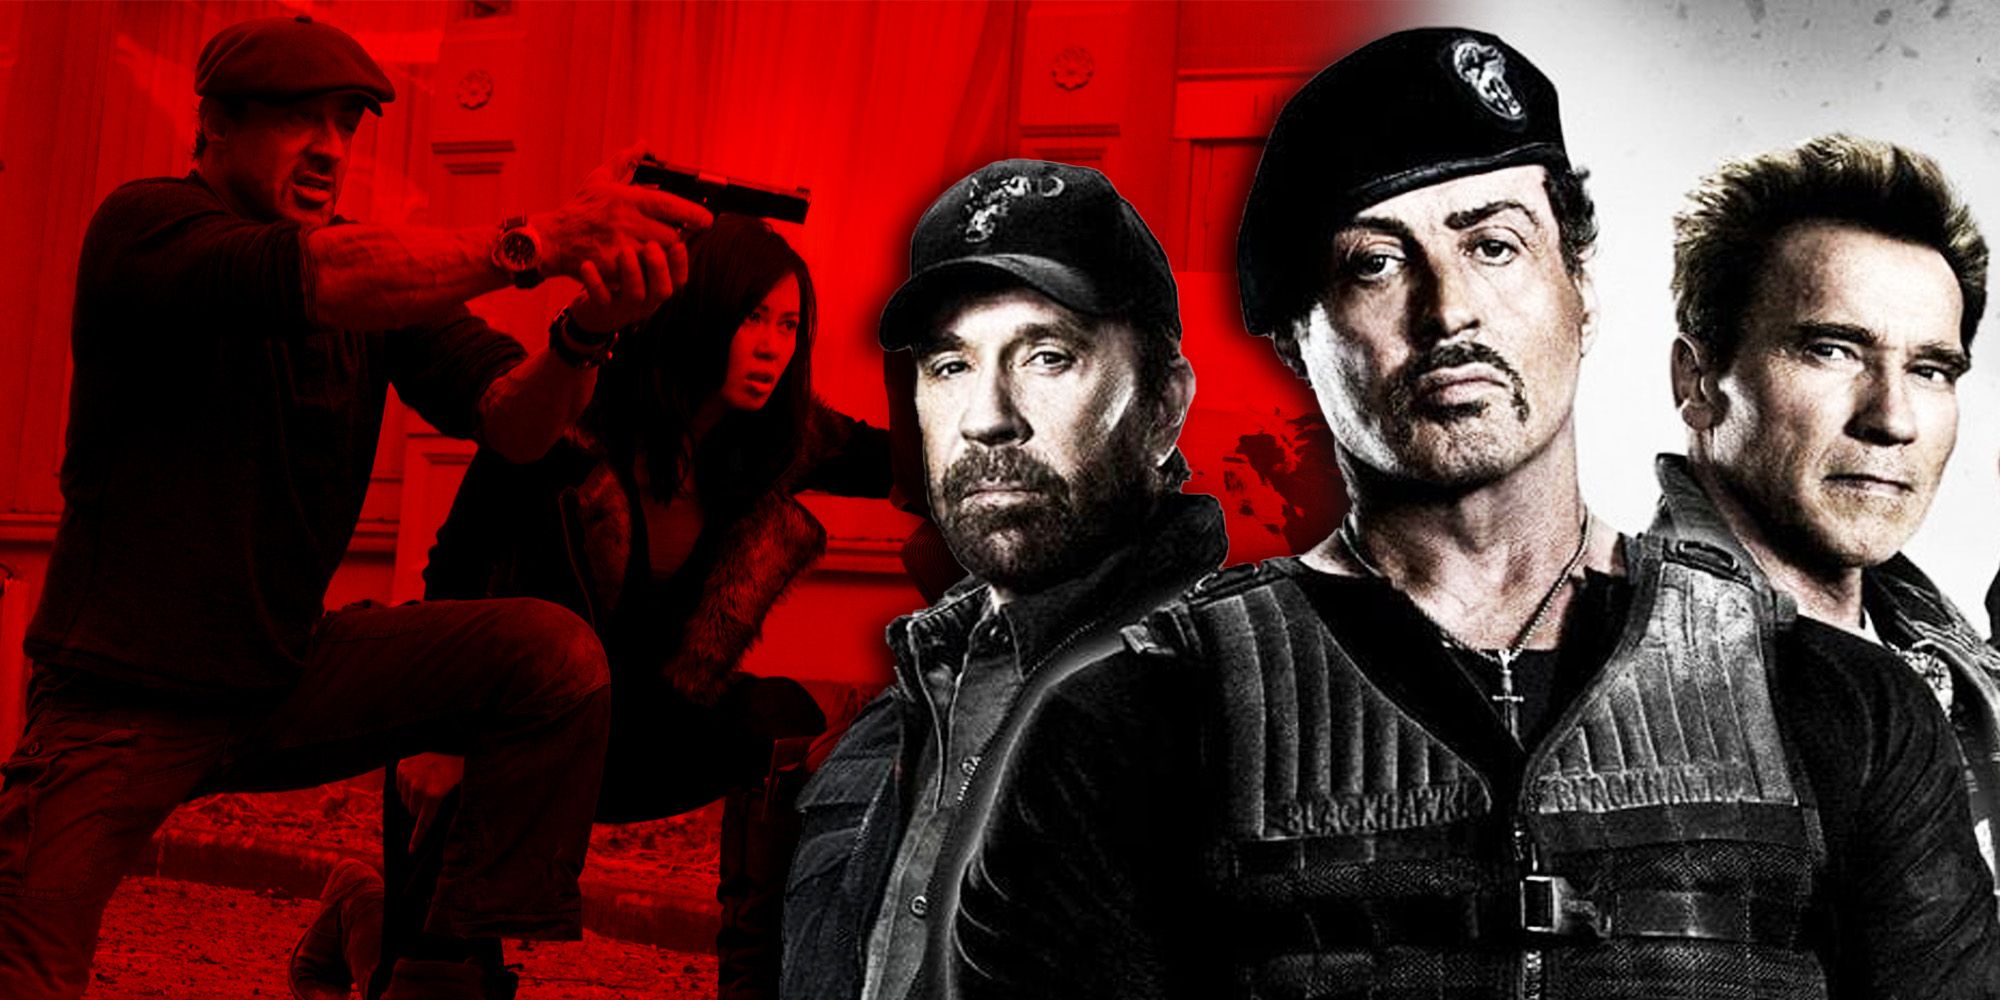 expendables-movie-one-team-member-killed-reason